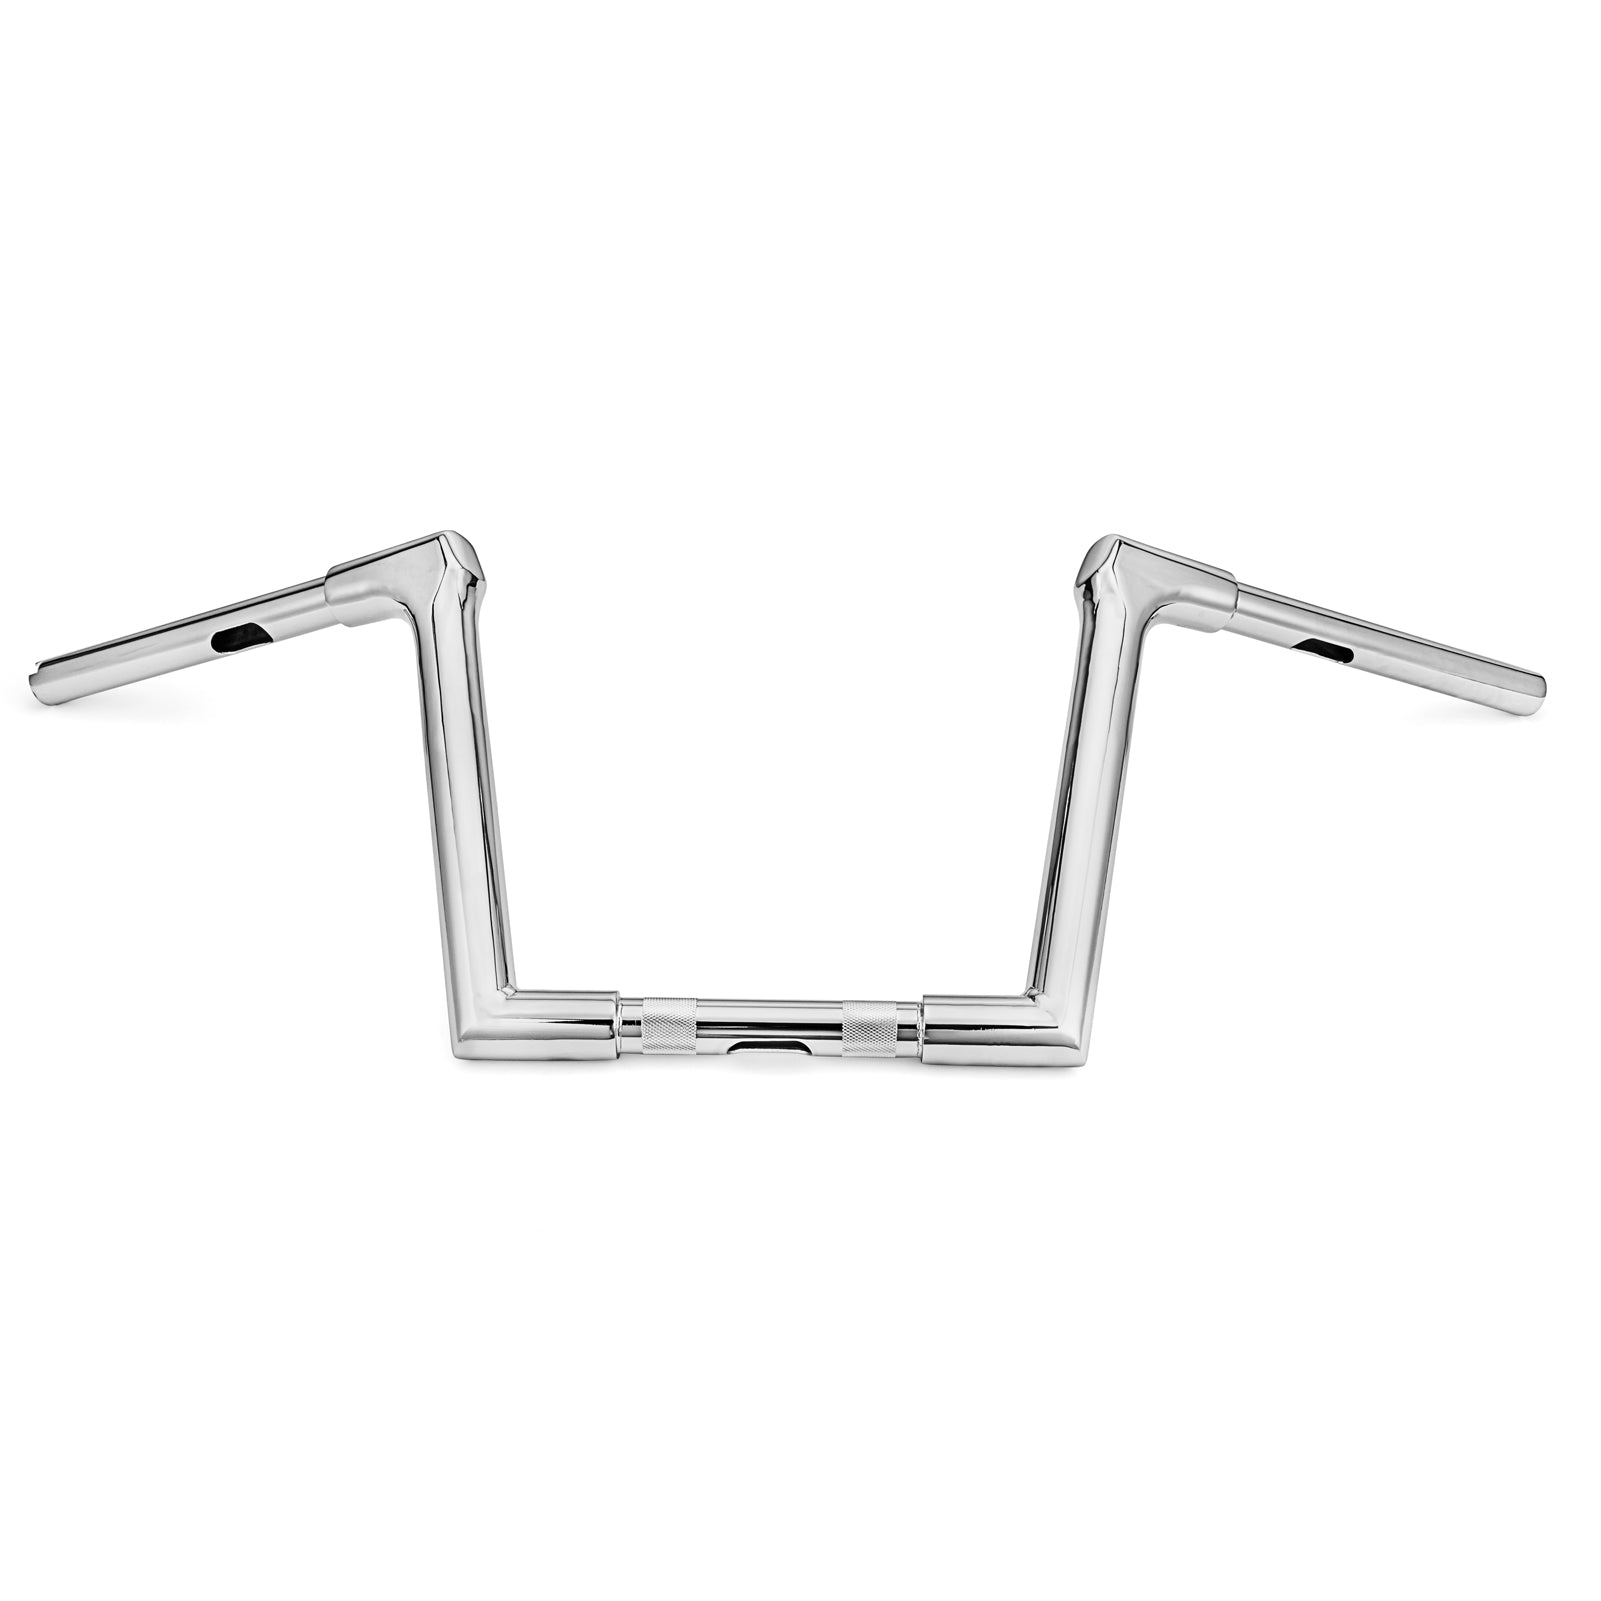 Harley Dyna Low Riders Super Glides 1" Clamp Fused APE Handlebar-2